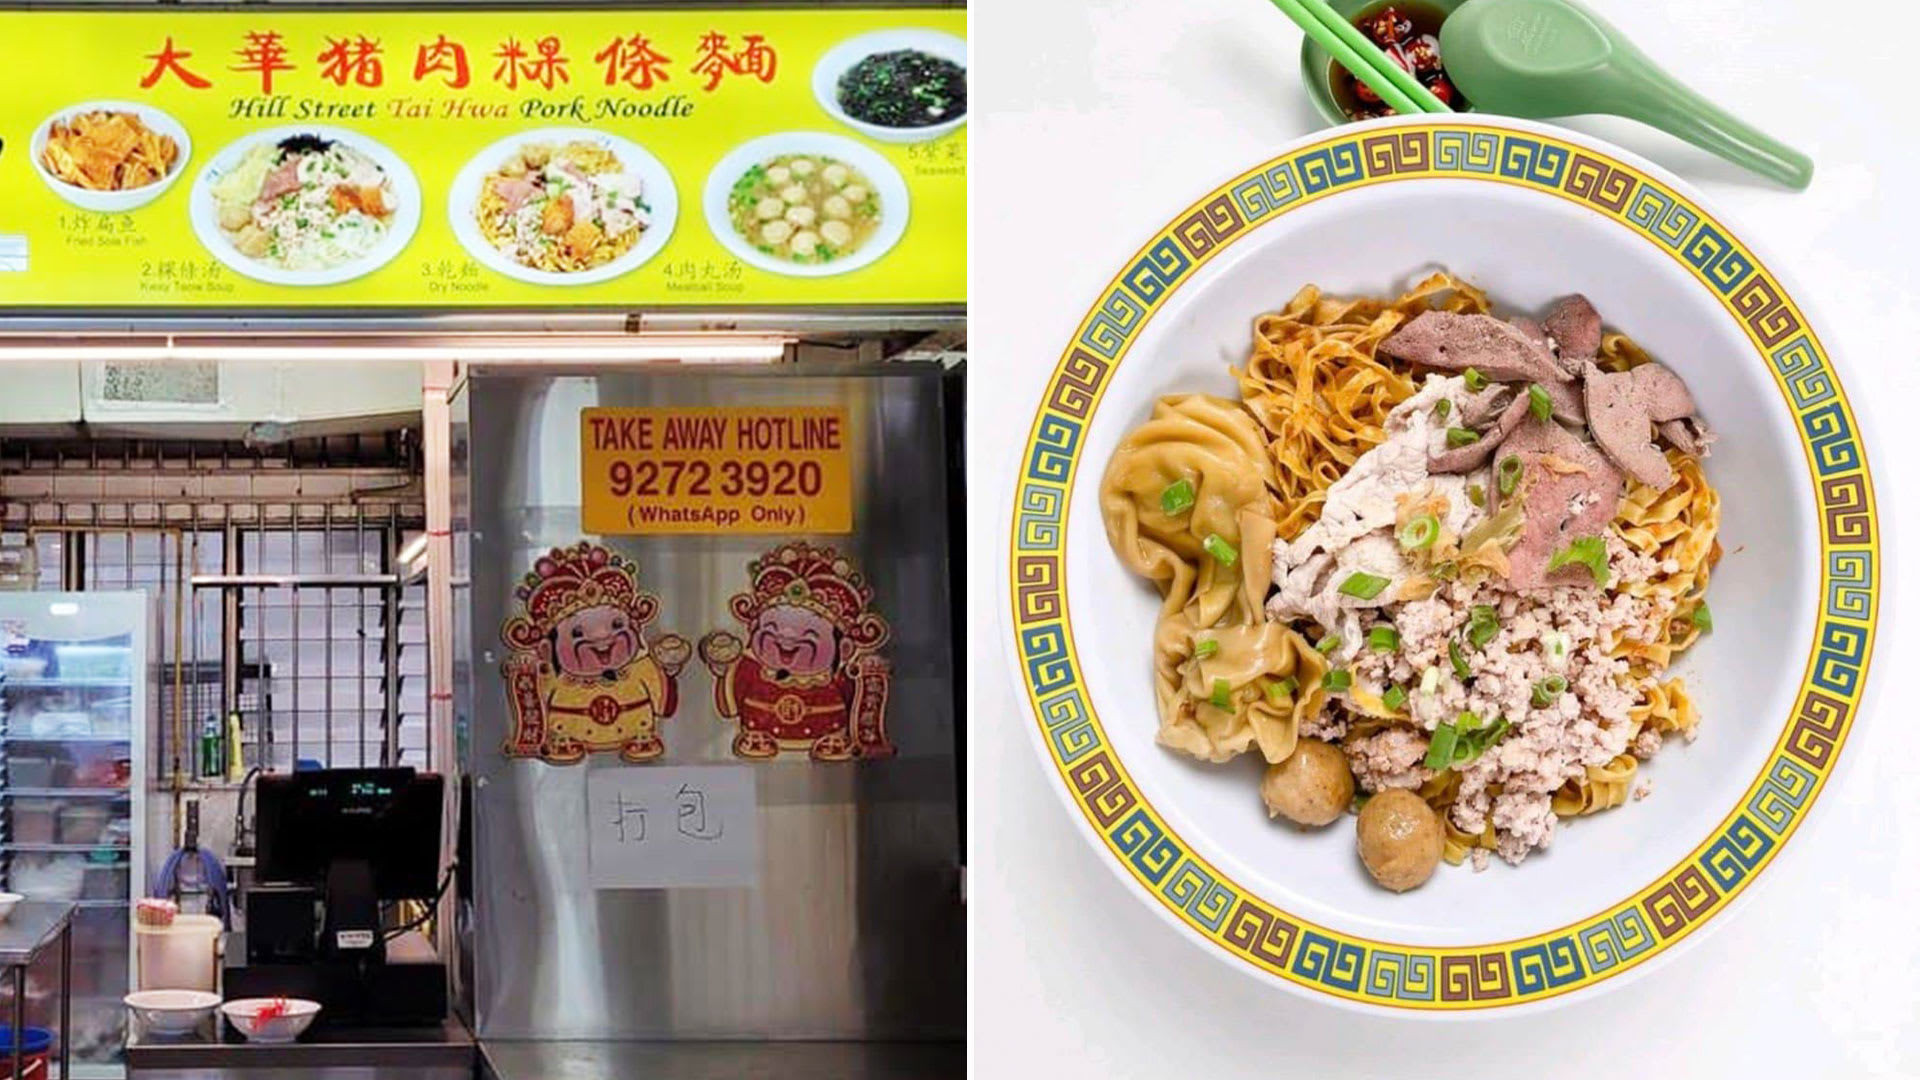 1-Michelin-Starred Hill St Tai Hwa Pork Noodle Has New Preorder Takeaway Counter